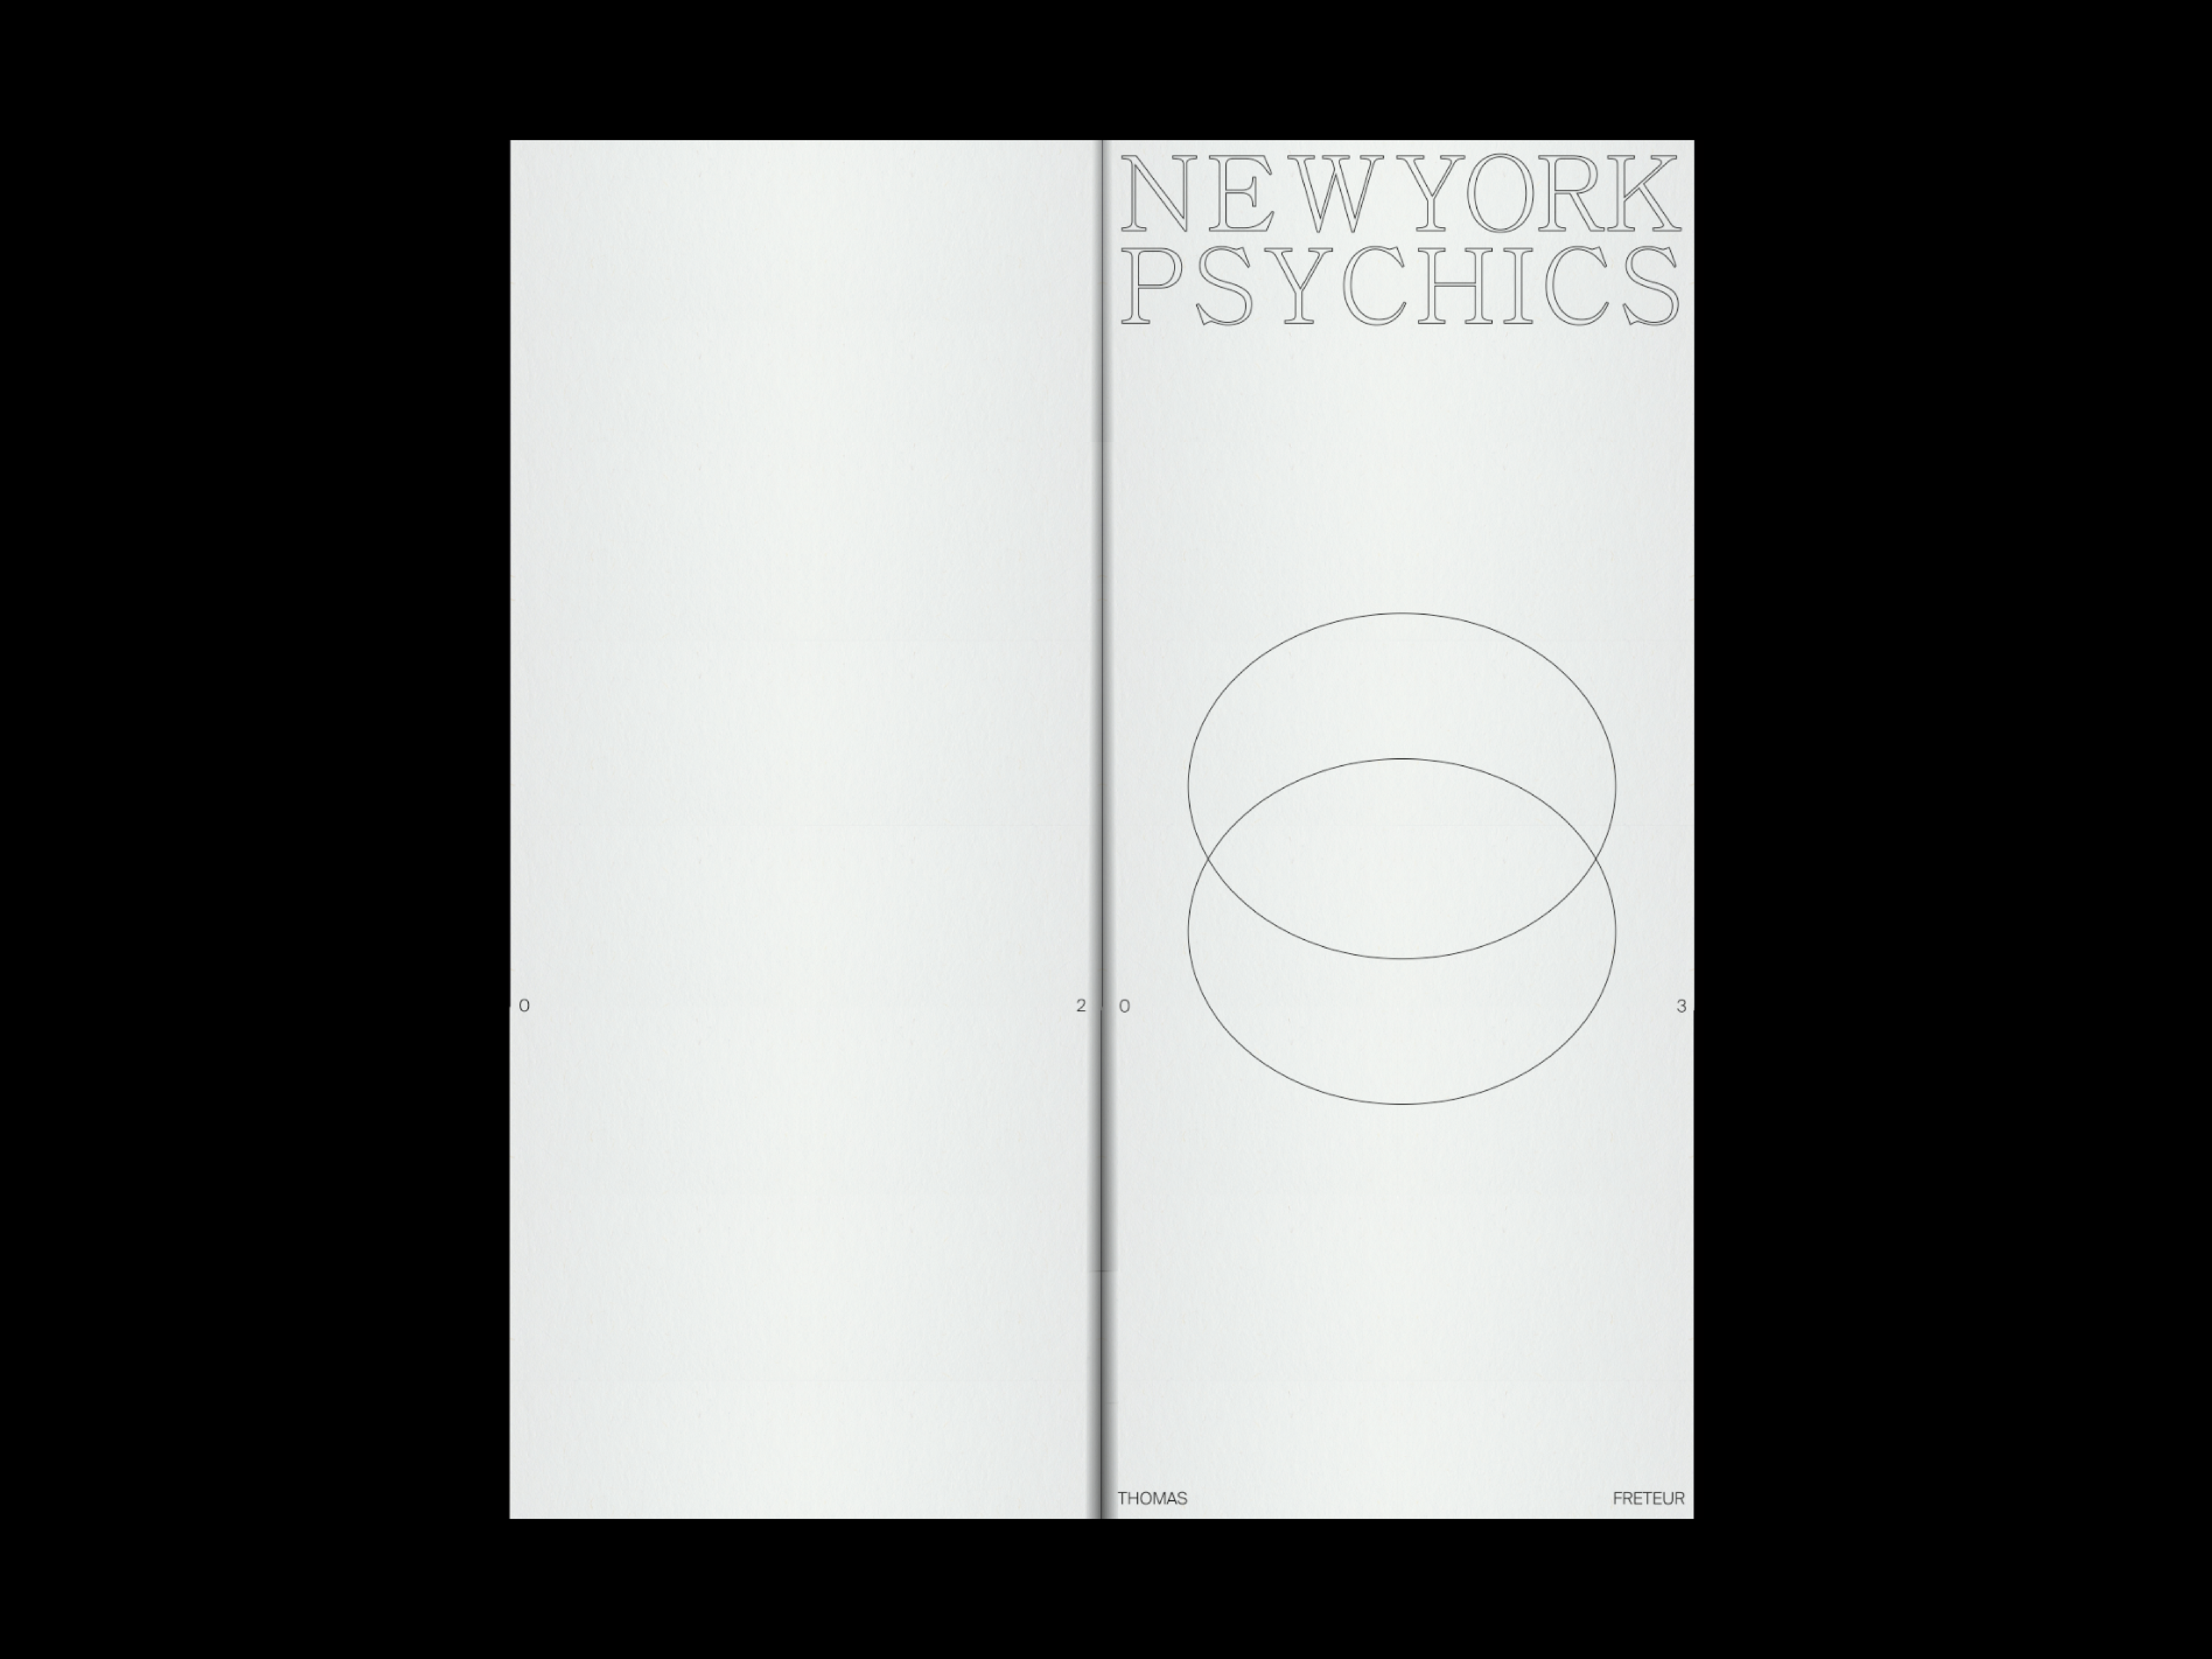 http://julienbaiamonte.com/content/1-projects/new-york-psychics/nyc_psychics_scan006_baiamonte_251019.png.png